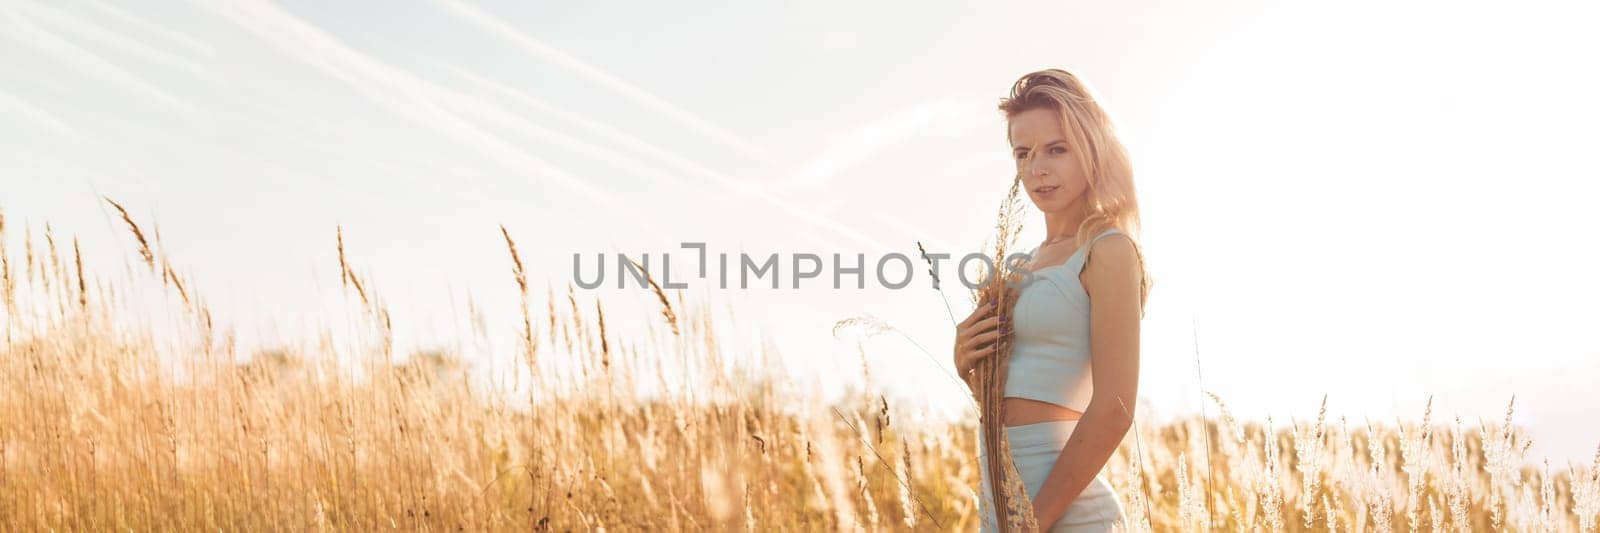 Beautiful blonde woman on a walk in a field with dry grass. A walk in nature, sunset in a field of pampas grass. Life style.